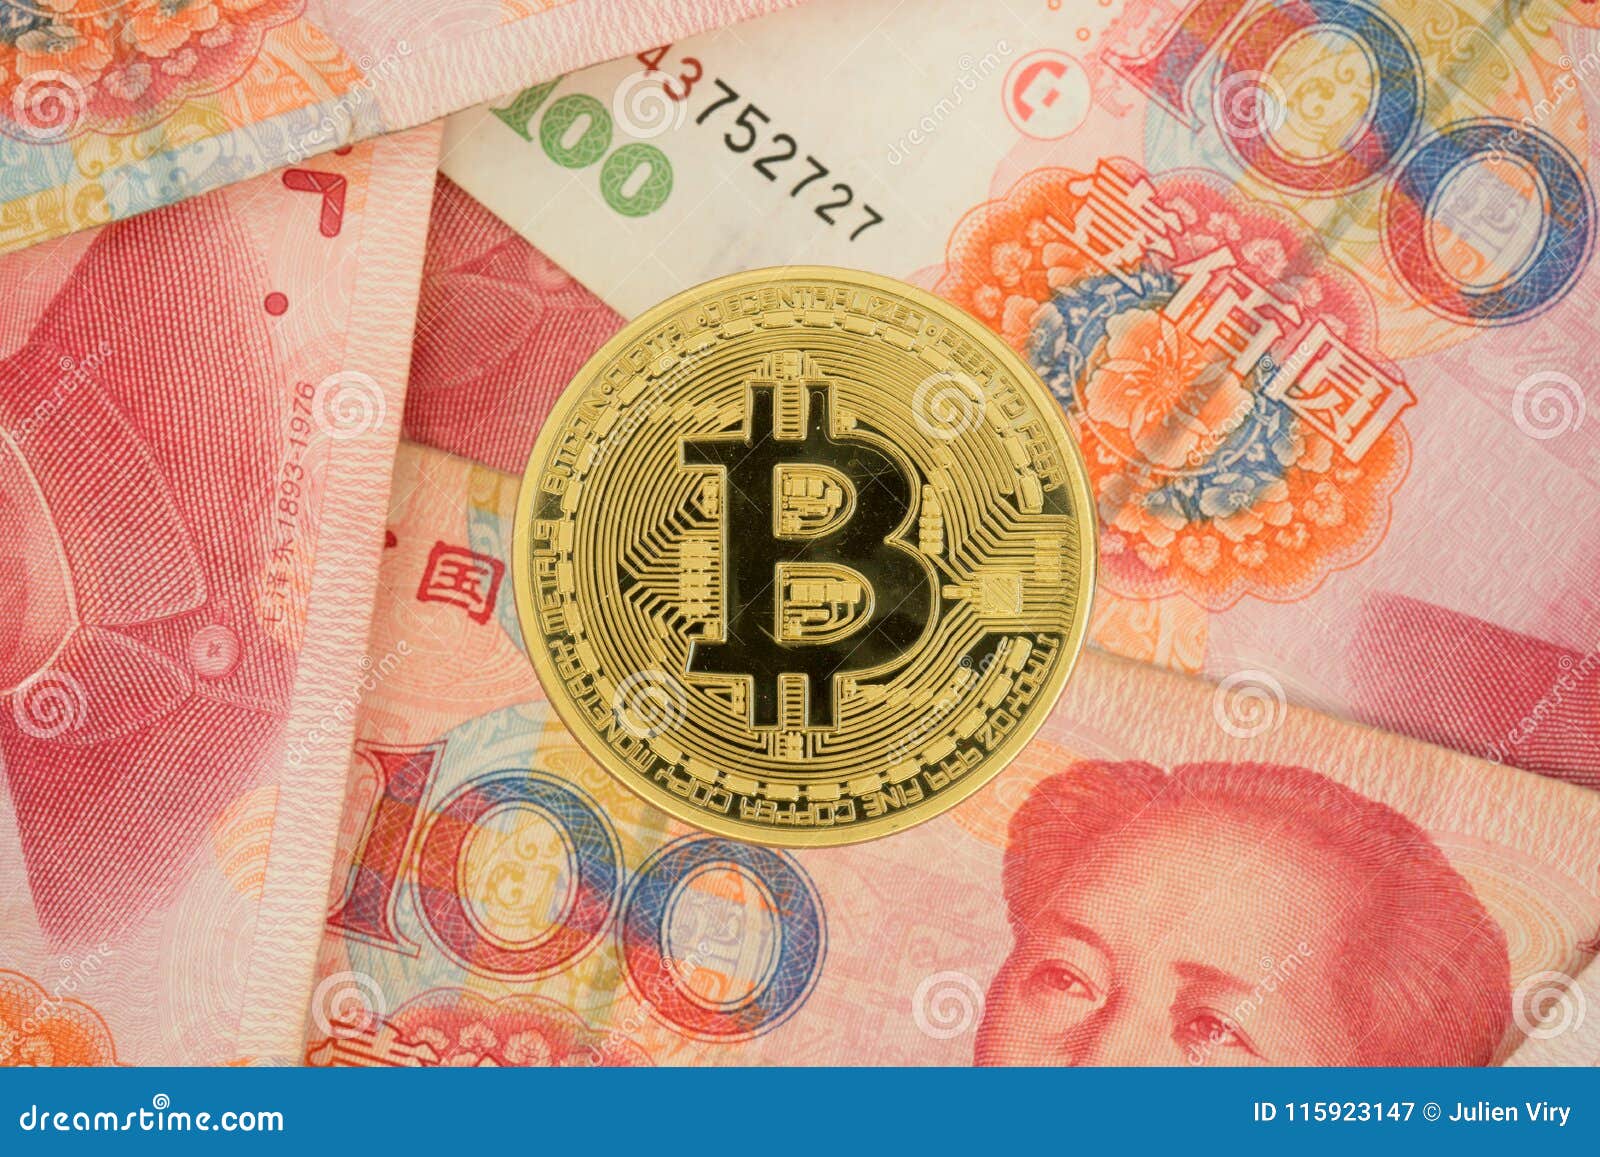 Bitcoin Coin On Chinese Yuan Bills - Crypto Currency In ...